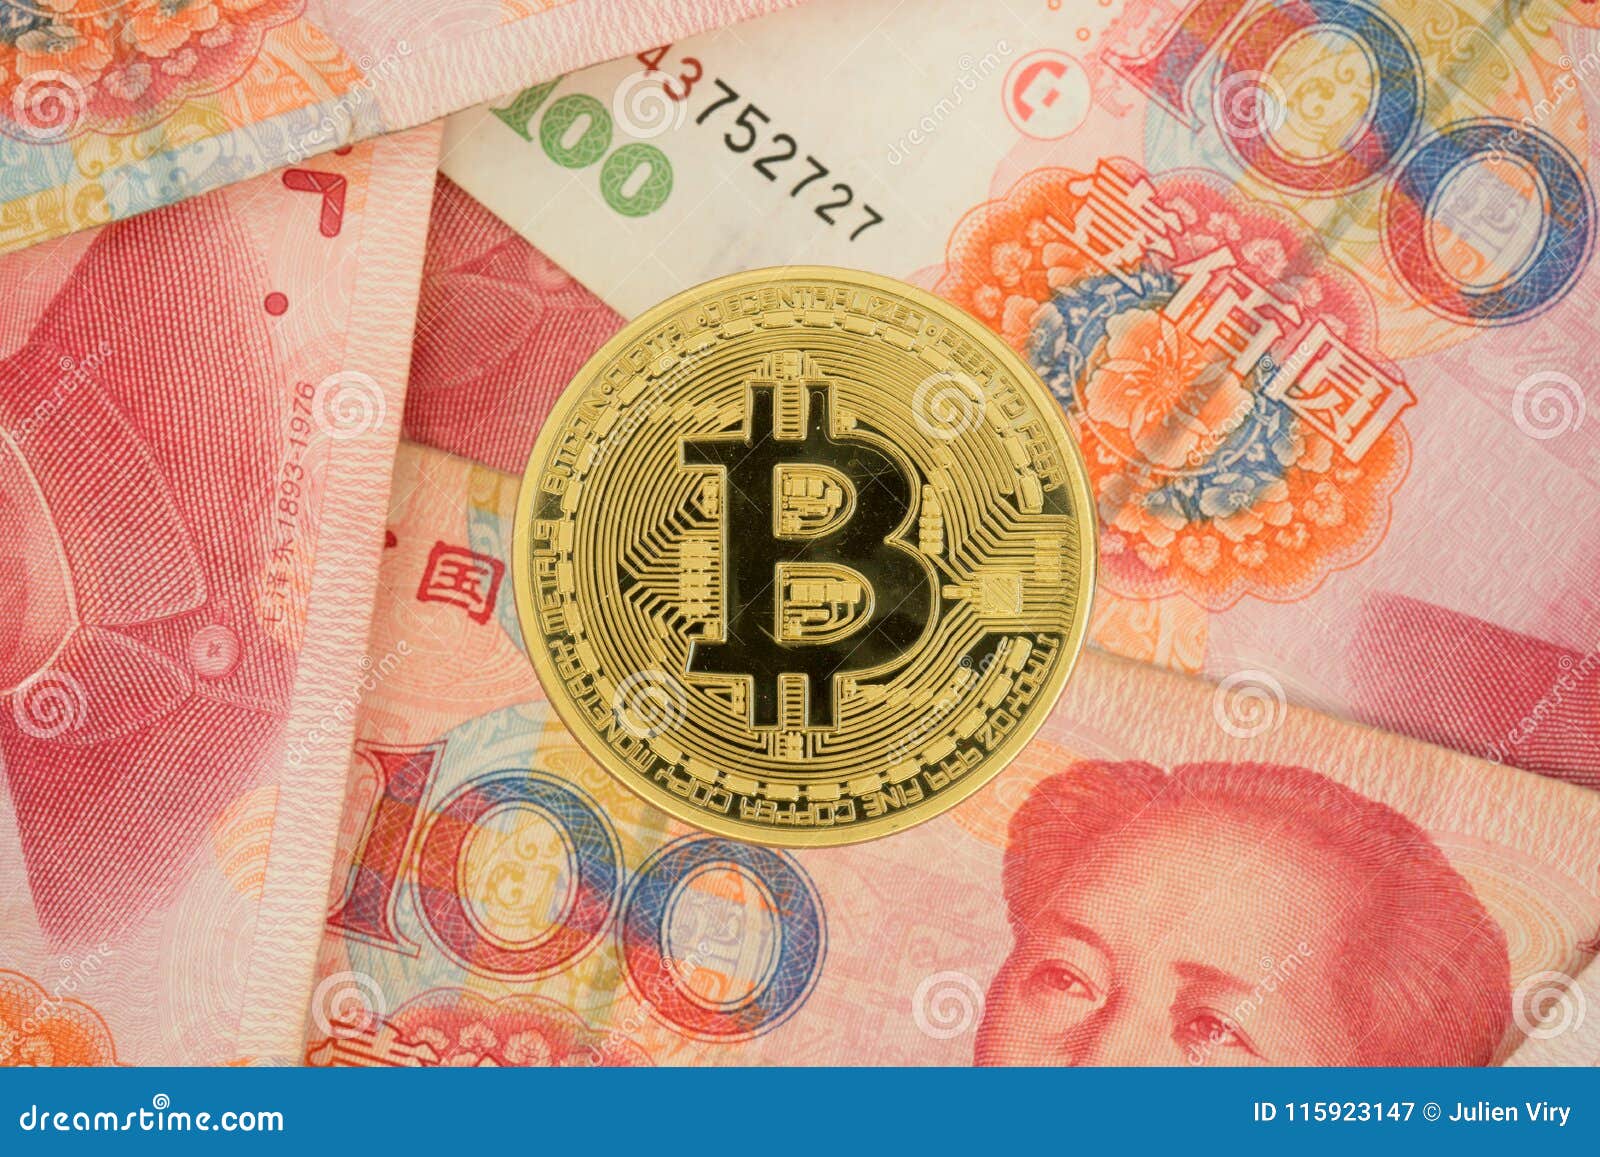 Bitcoin Coin On Chinese Yuan Bills - Crypto Currency In ...